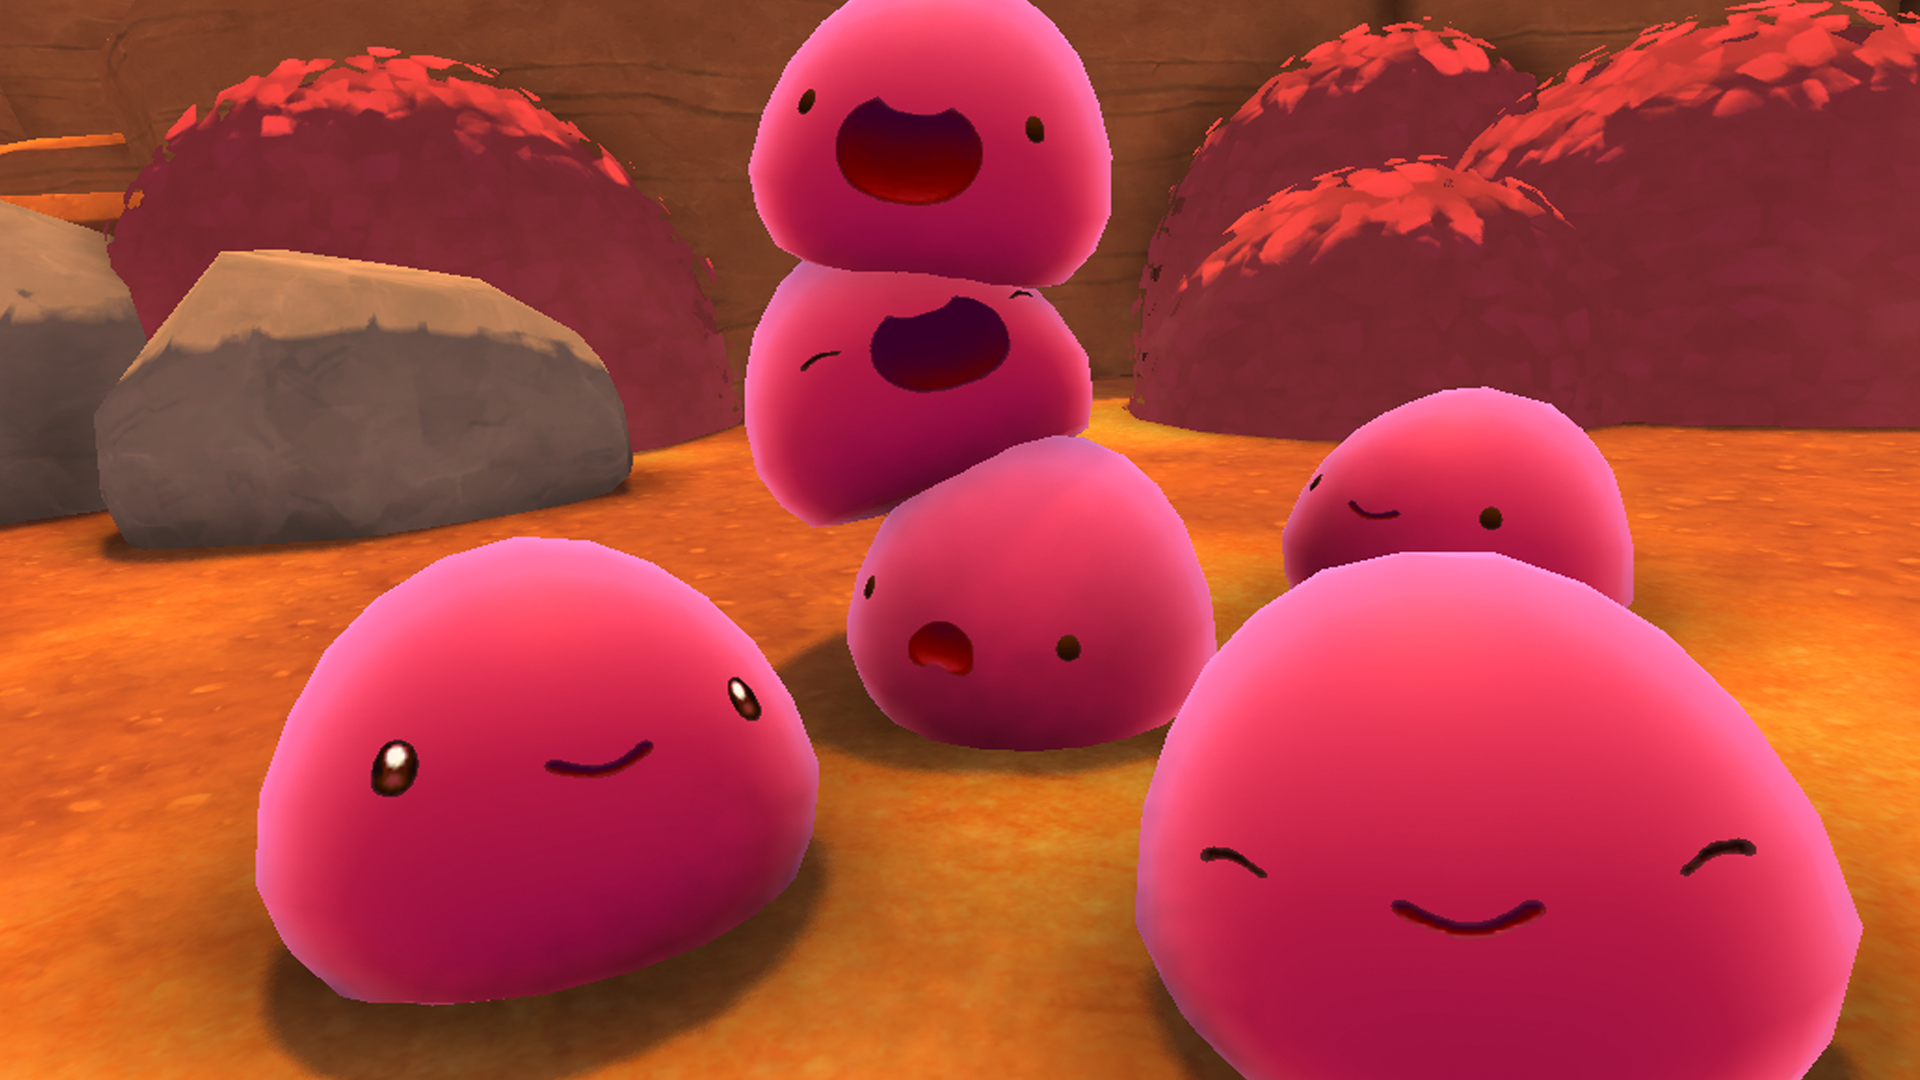 slime rancher multiplayer mod pc